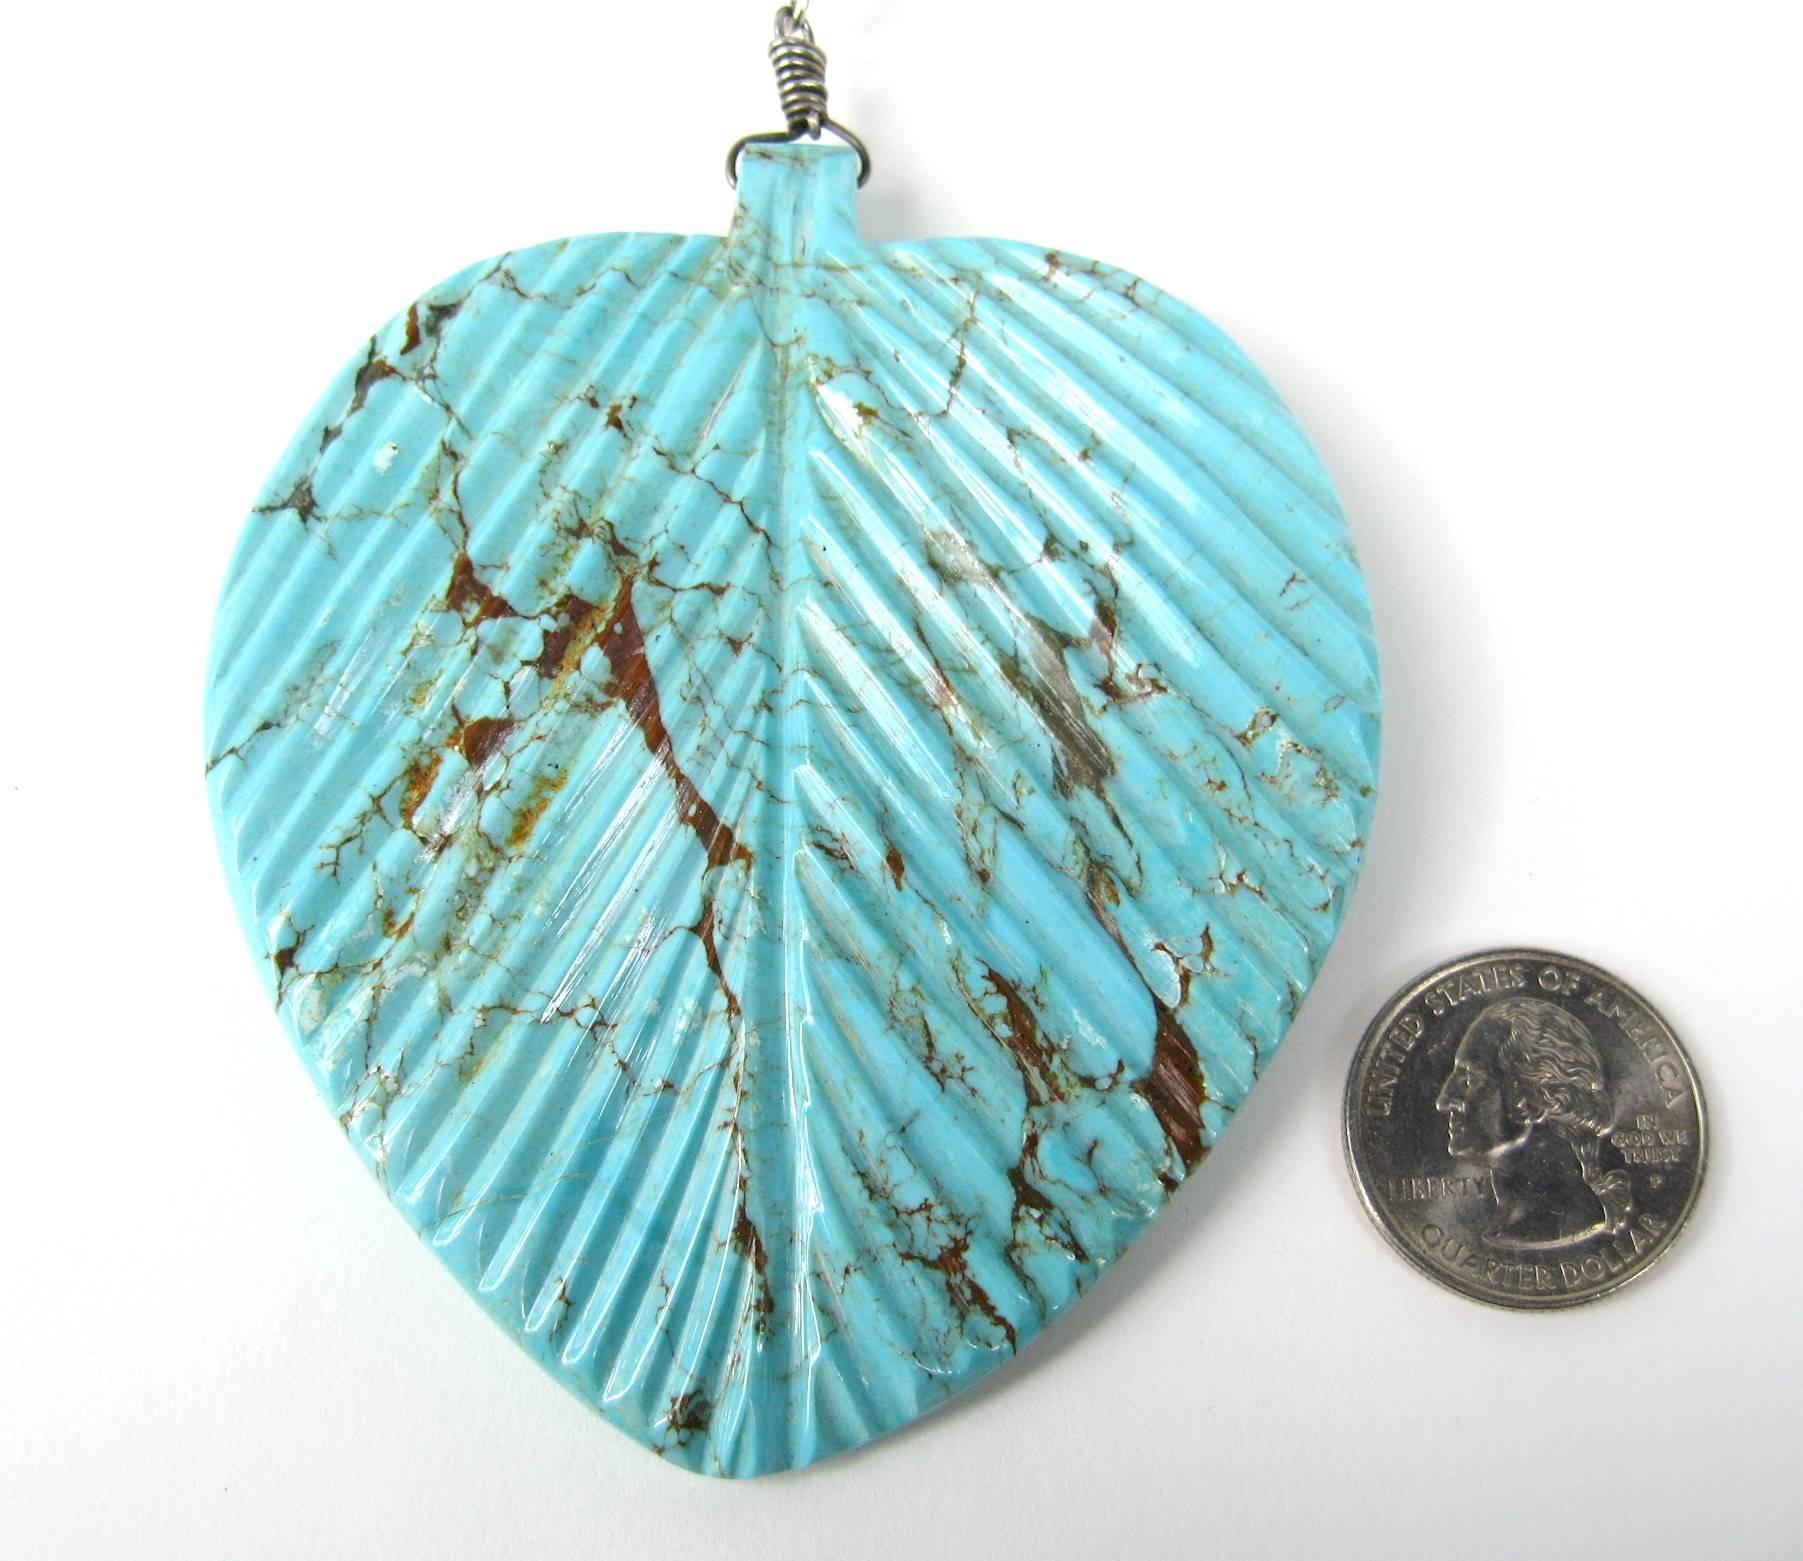 Stunning Massive Turquoise Rondelle with Sterling Insets each signed by American Indian Artisan  WAYNE AGUILAR, one of the finest silversmiths-jewelers from the SANTO DOMINGO KEWA PUEBLO. Massive Carved Turquoise Leaf Sterling Silver. Measuring 3 in